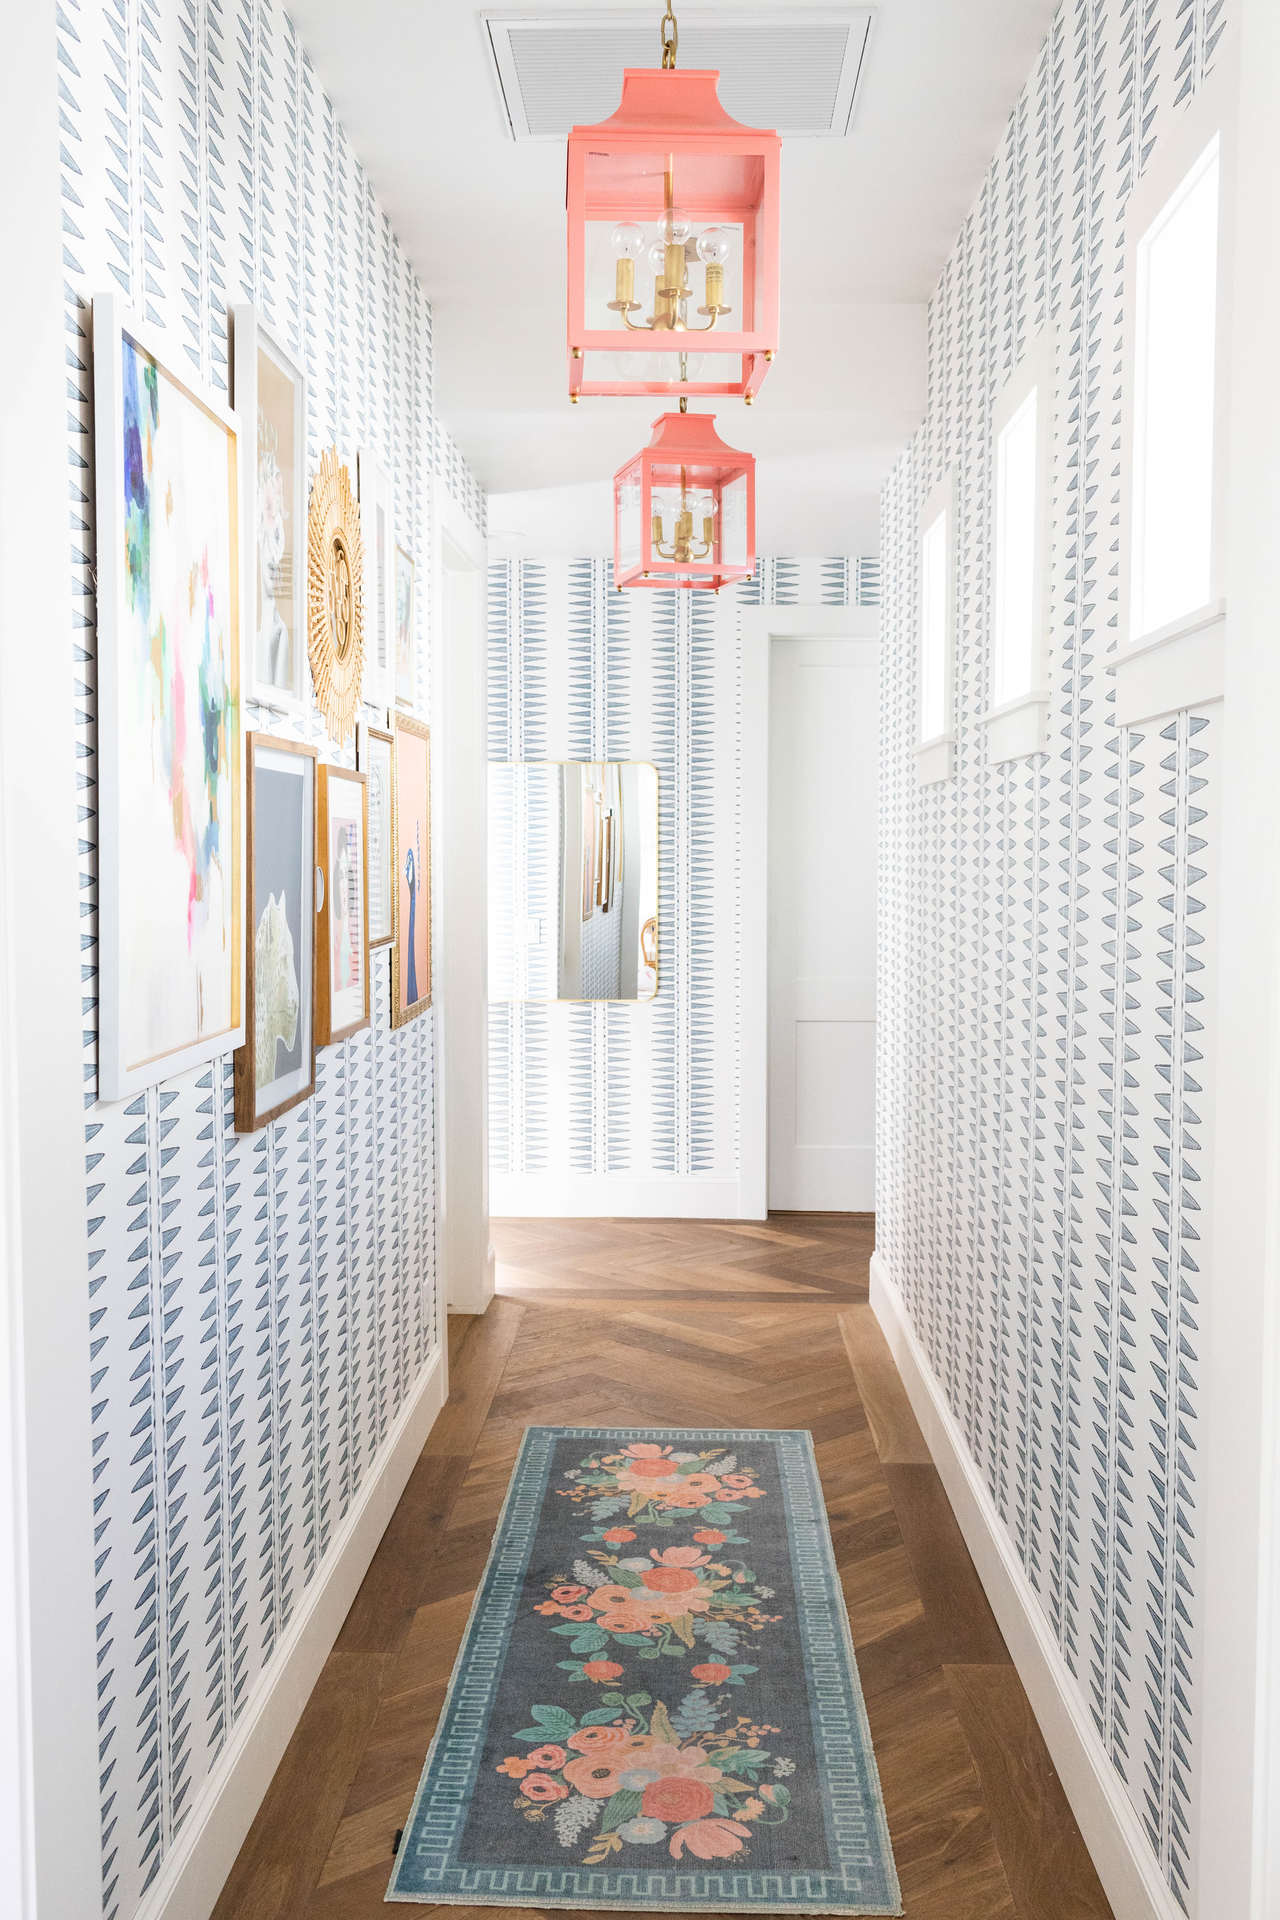 Jo Gick's hallway in Quill (Cadet) wallpaper | Coral & Tusk for Hygge & West